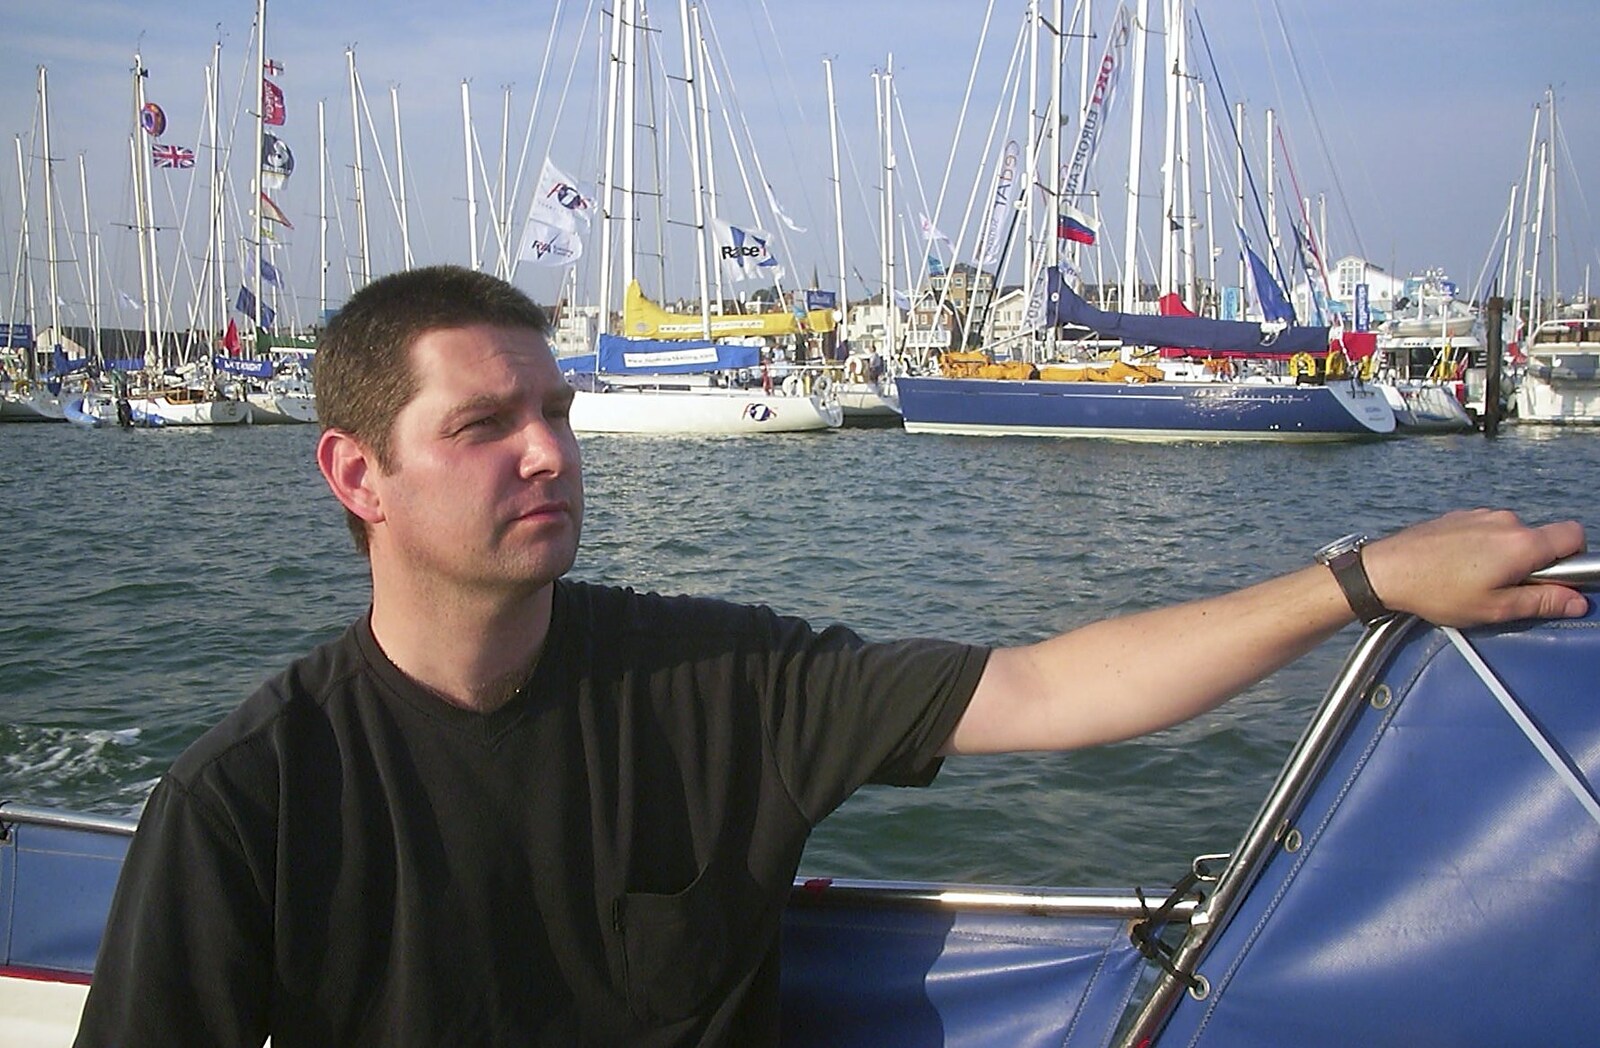 Sean looks out from Cowes Weekend, Cowes, Isle of Wight - 7th August 2004